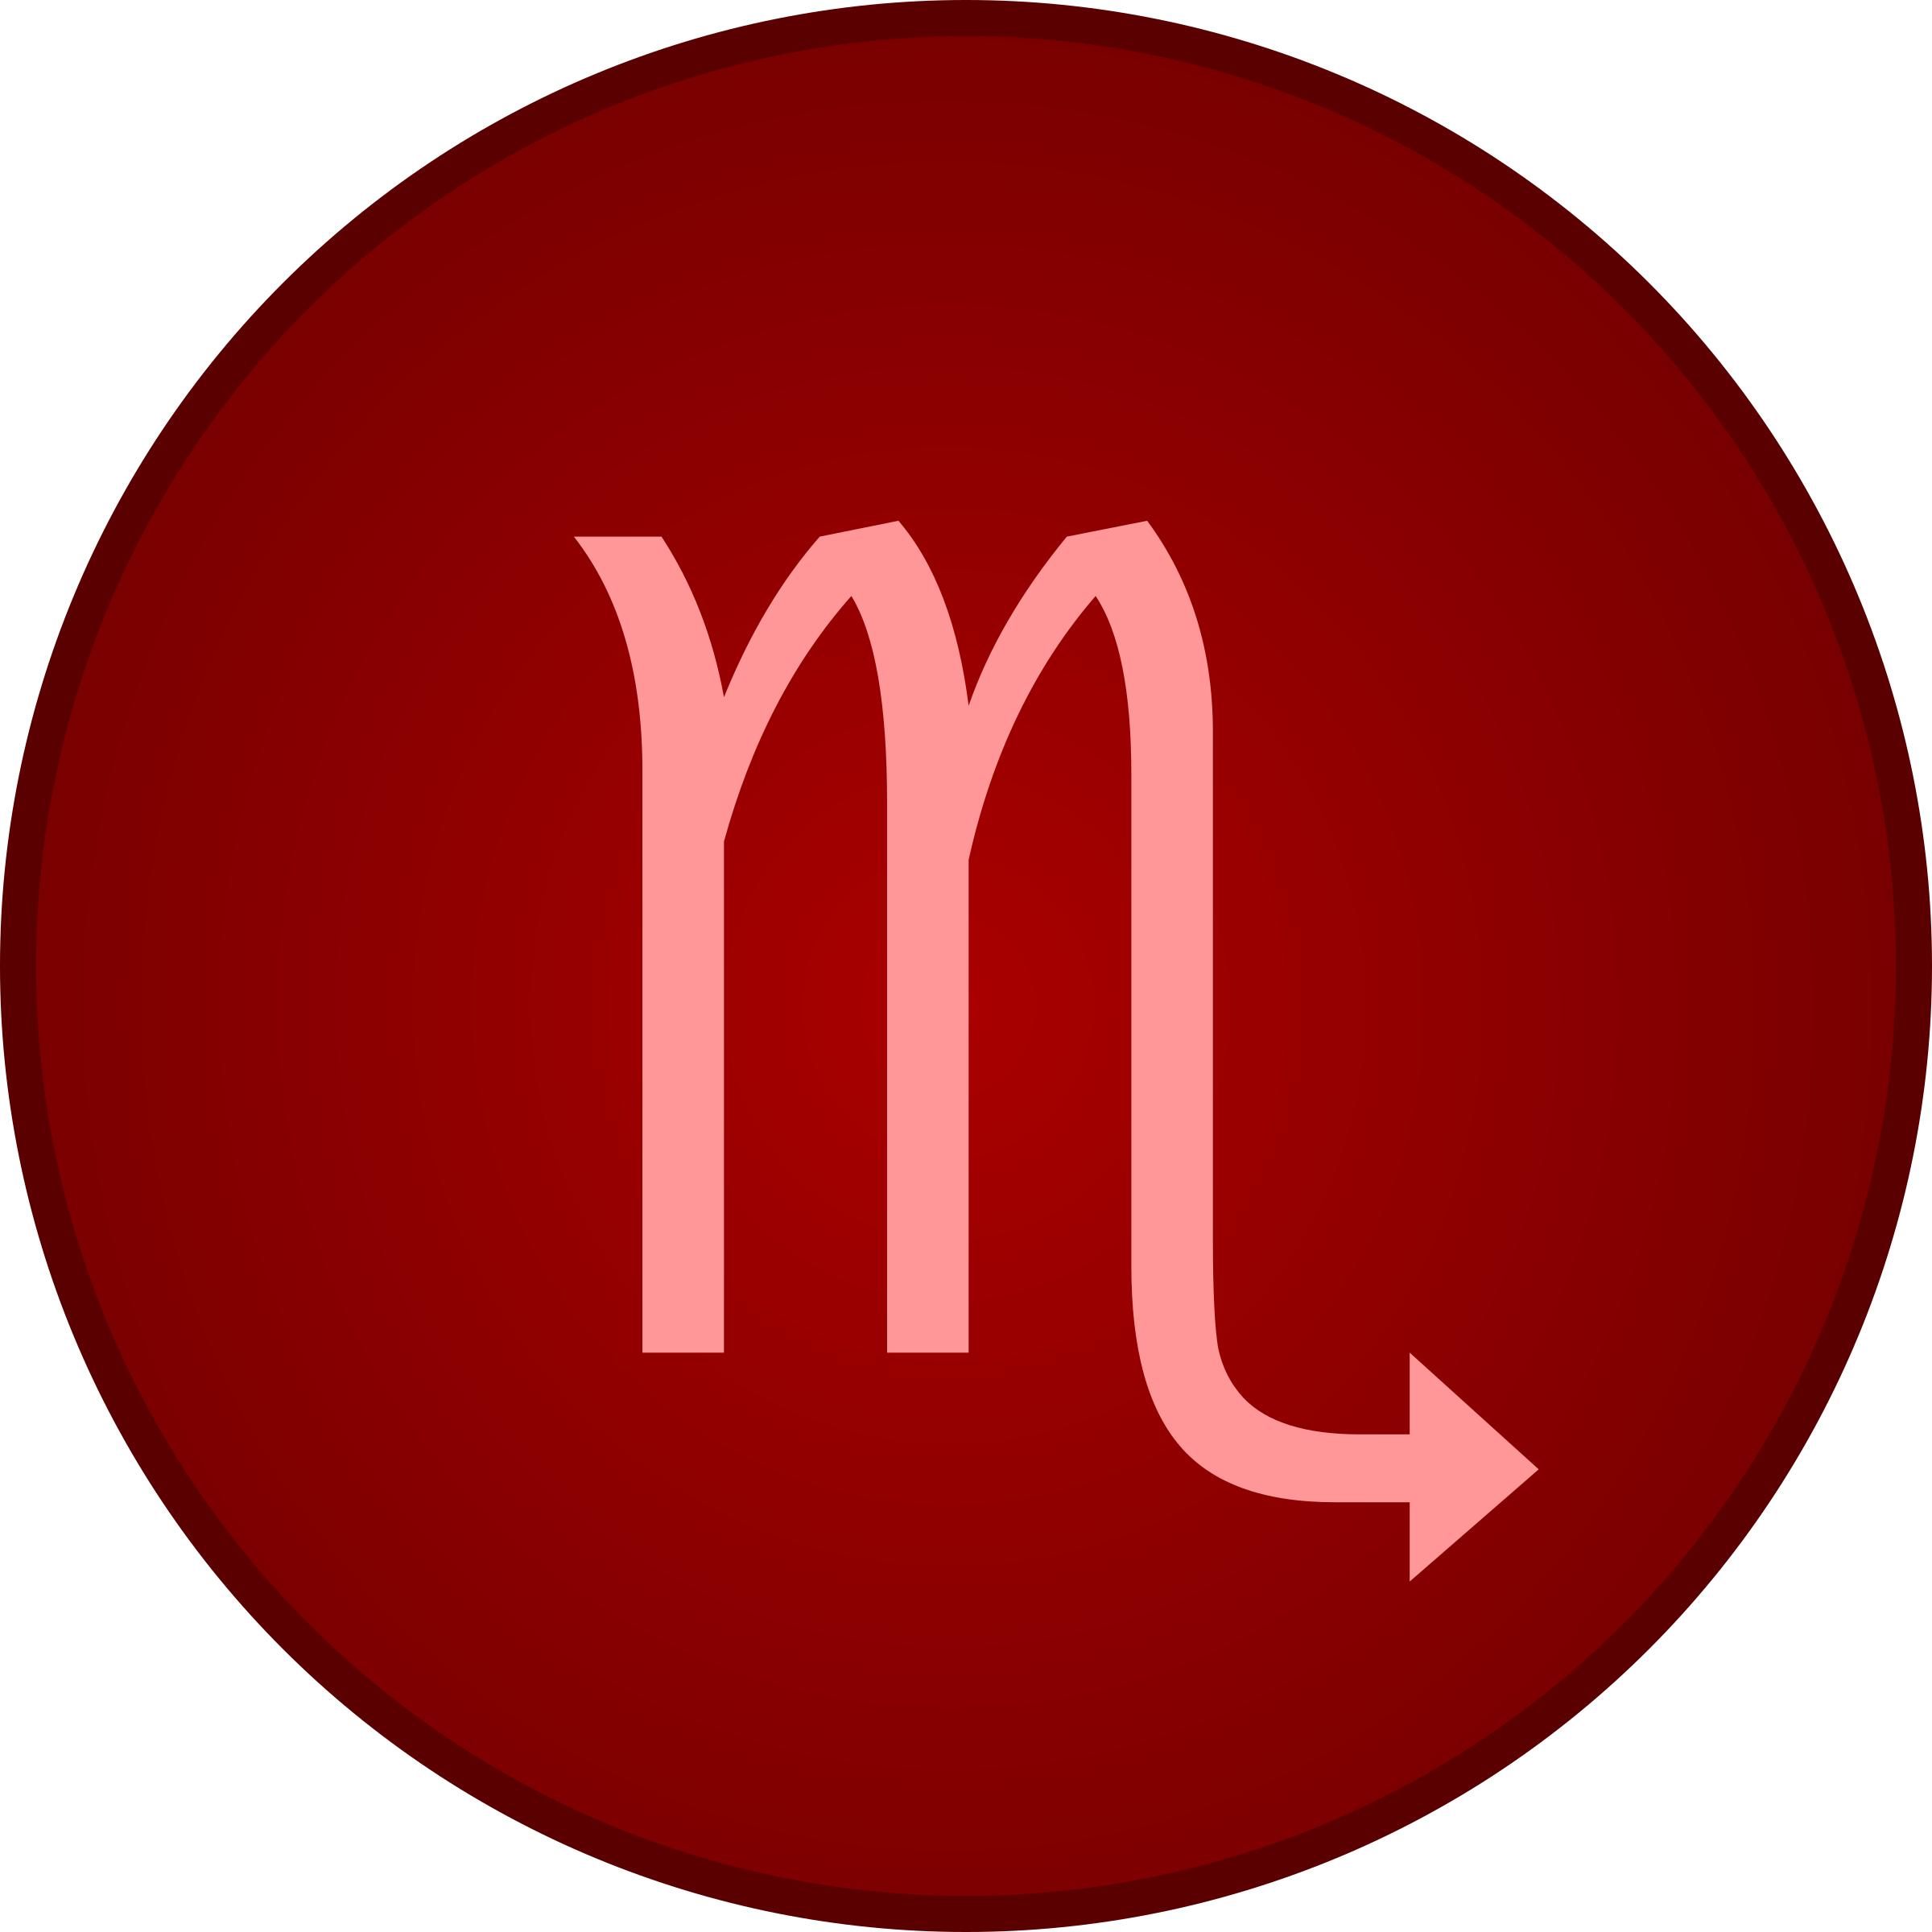 A Red Circle With A Scorpio Symbol